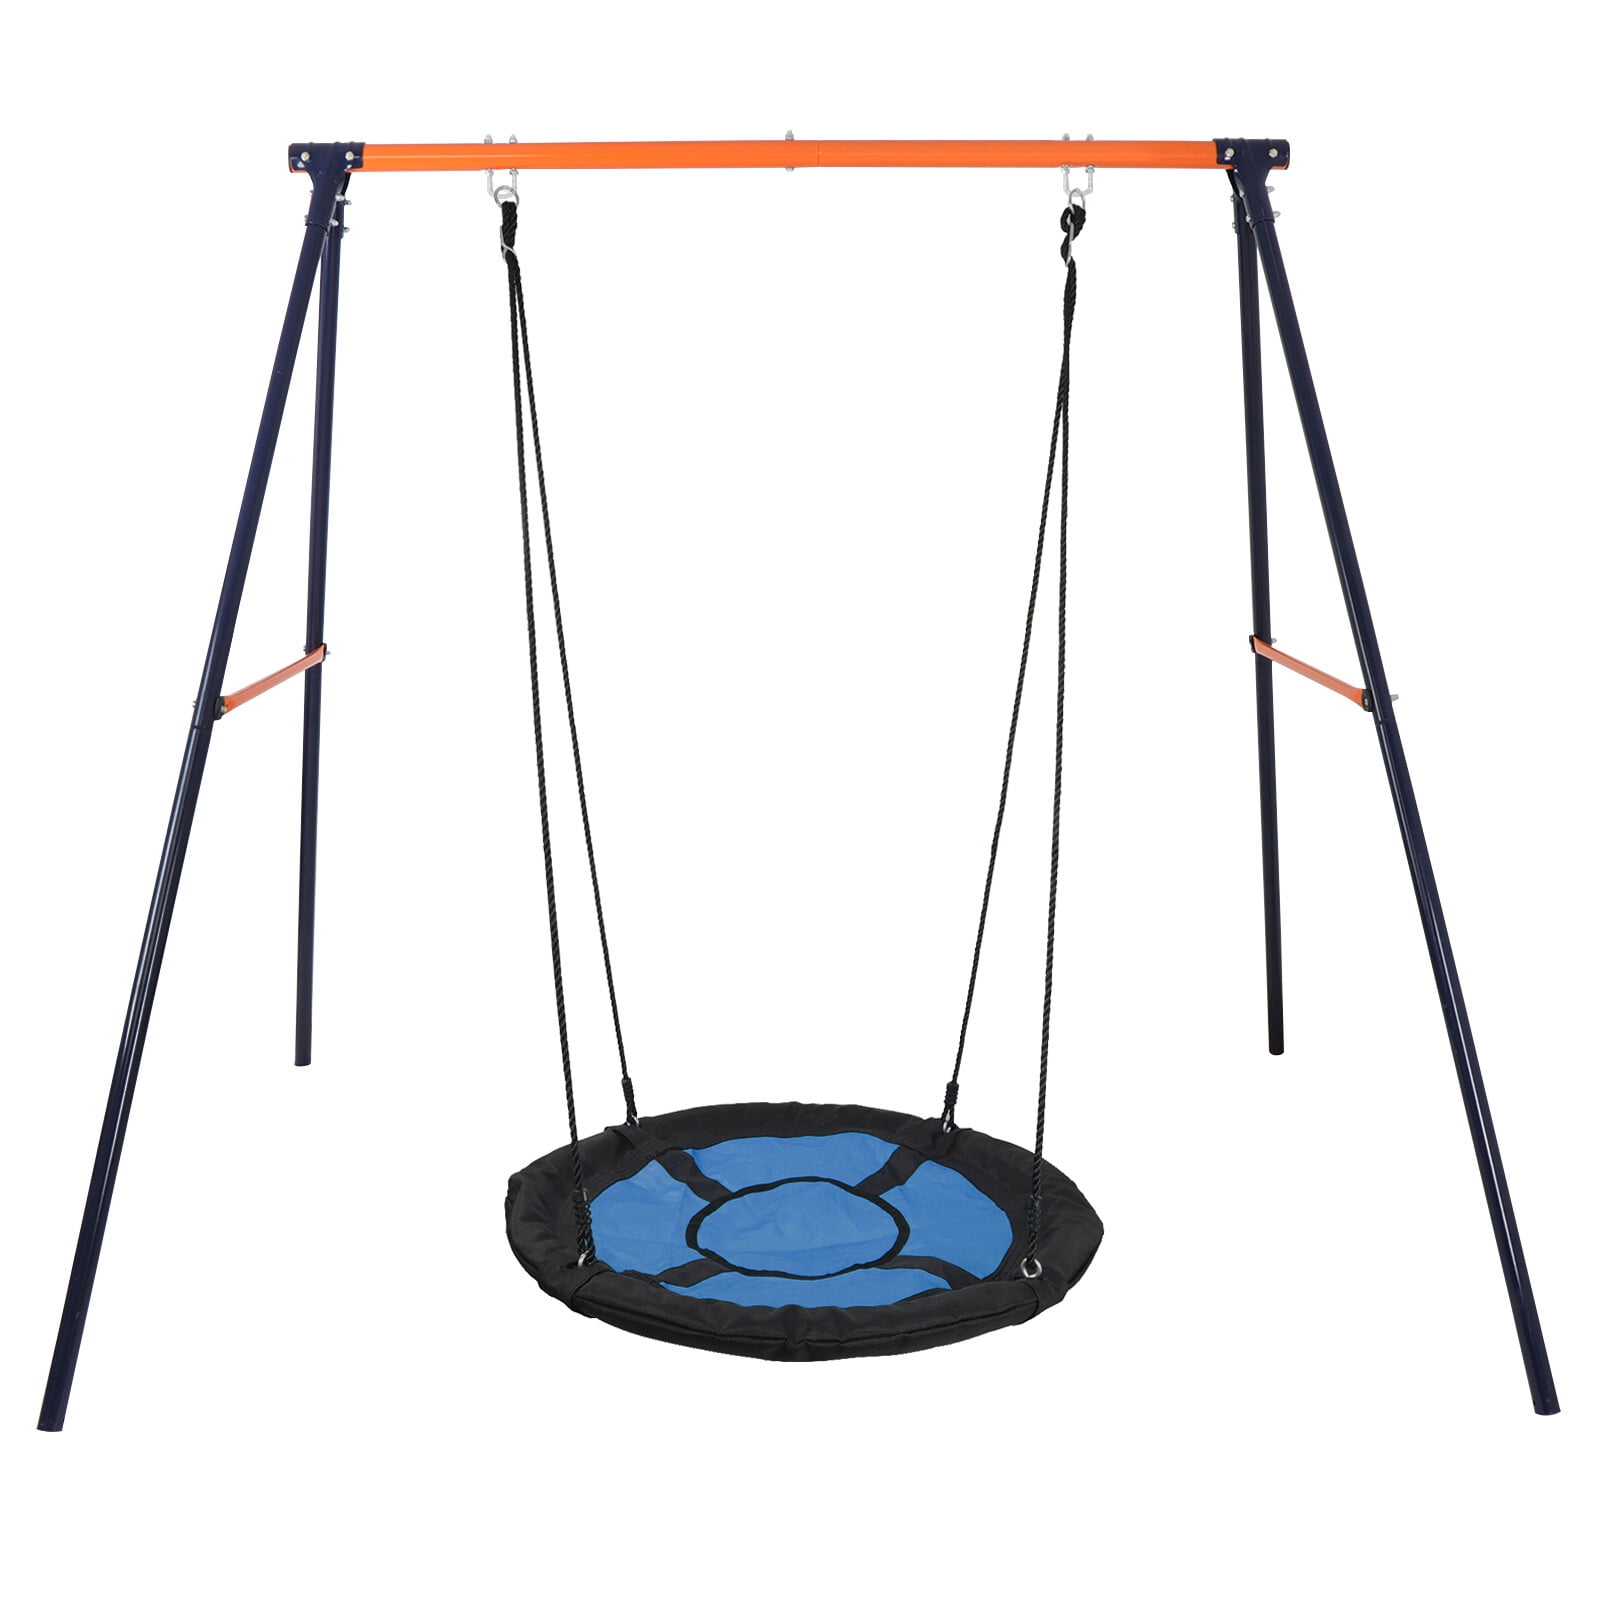 Safe and Breathy Seat Swing for Children Adults AMGYM 40 Saucer Tree Swing Kids Outdoor Platform Swing Set with Adjustable Ropes and Waterproof Colorful Oxford Cloth 